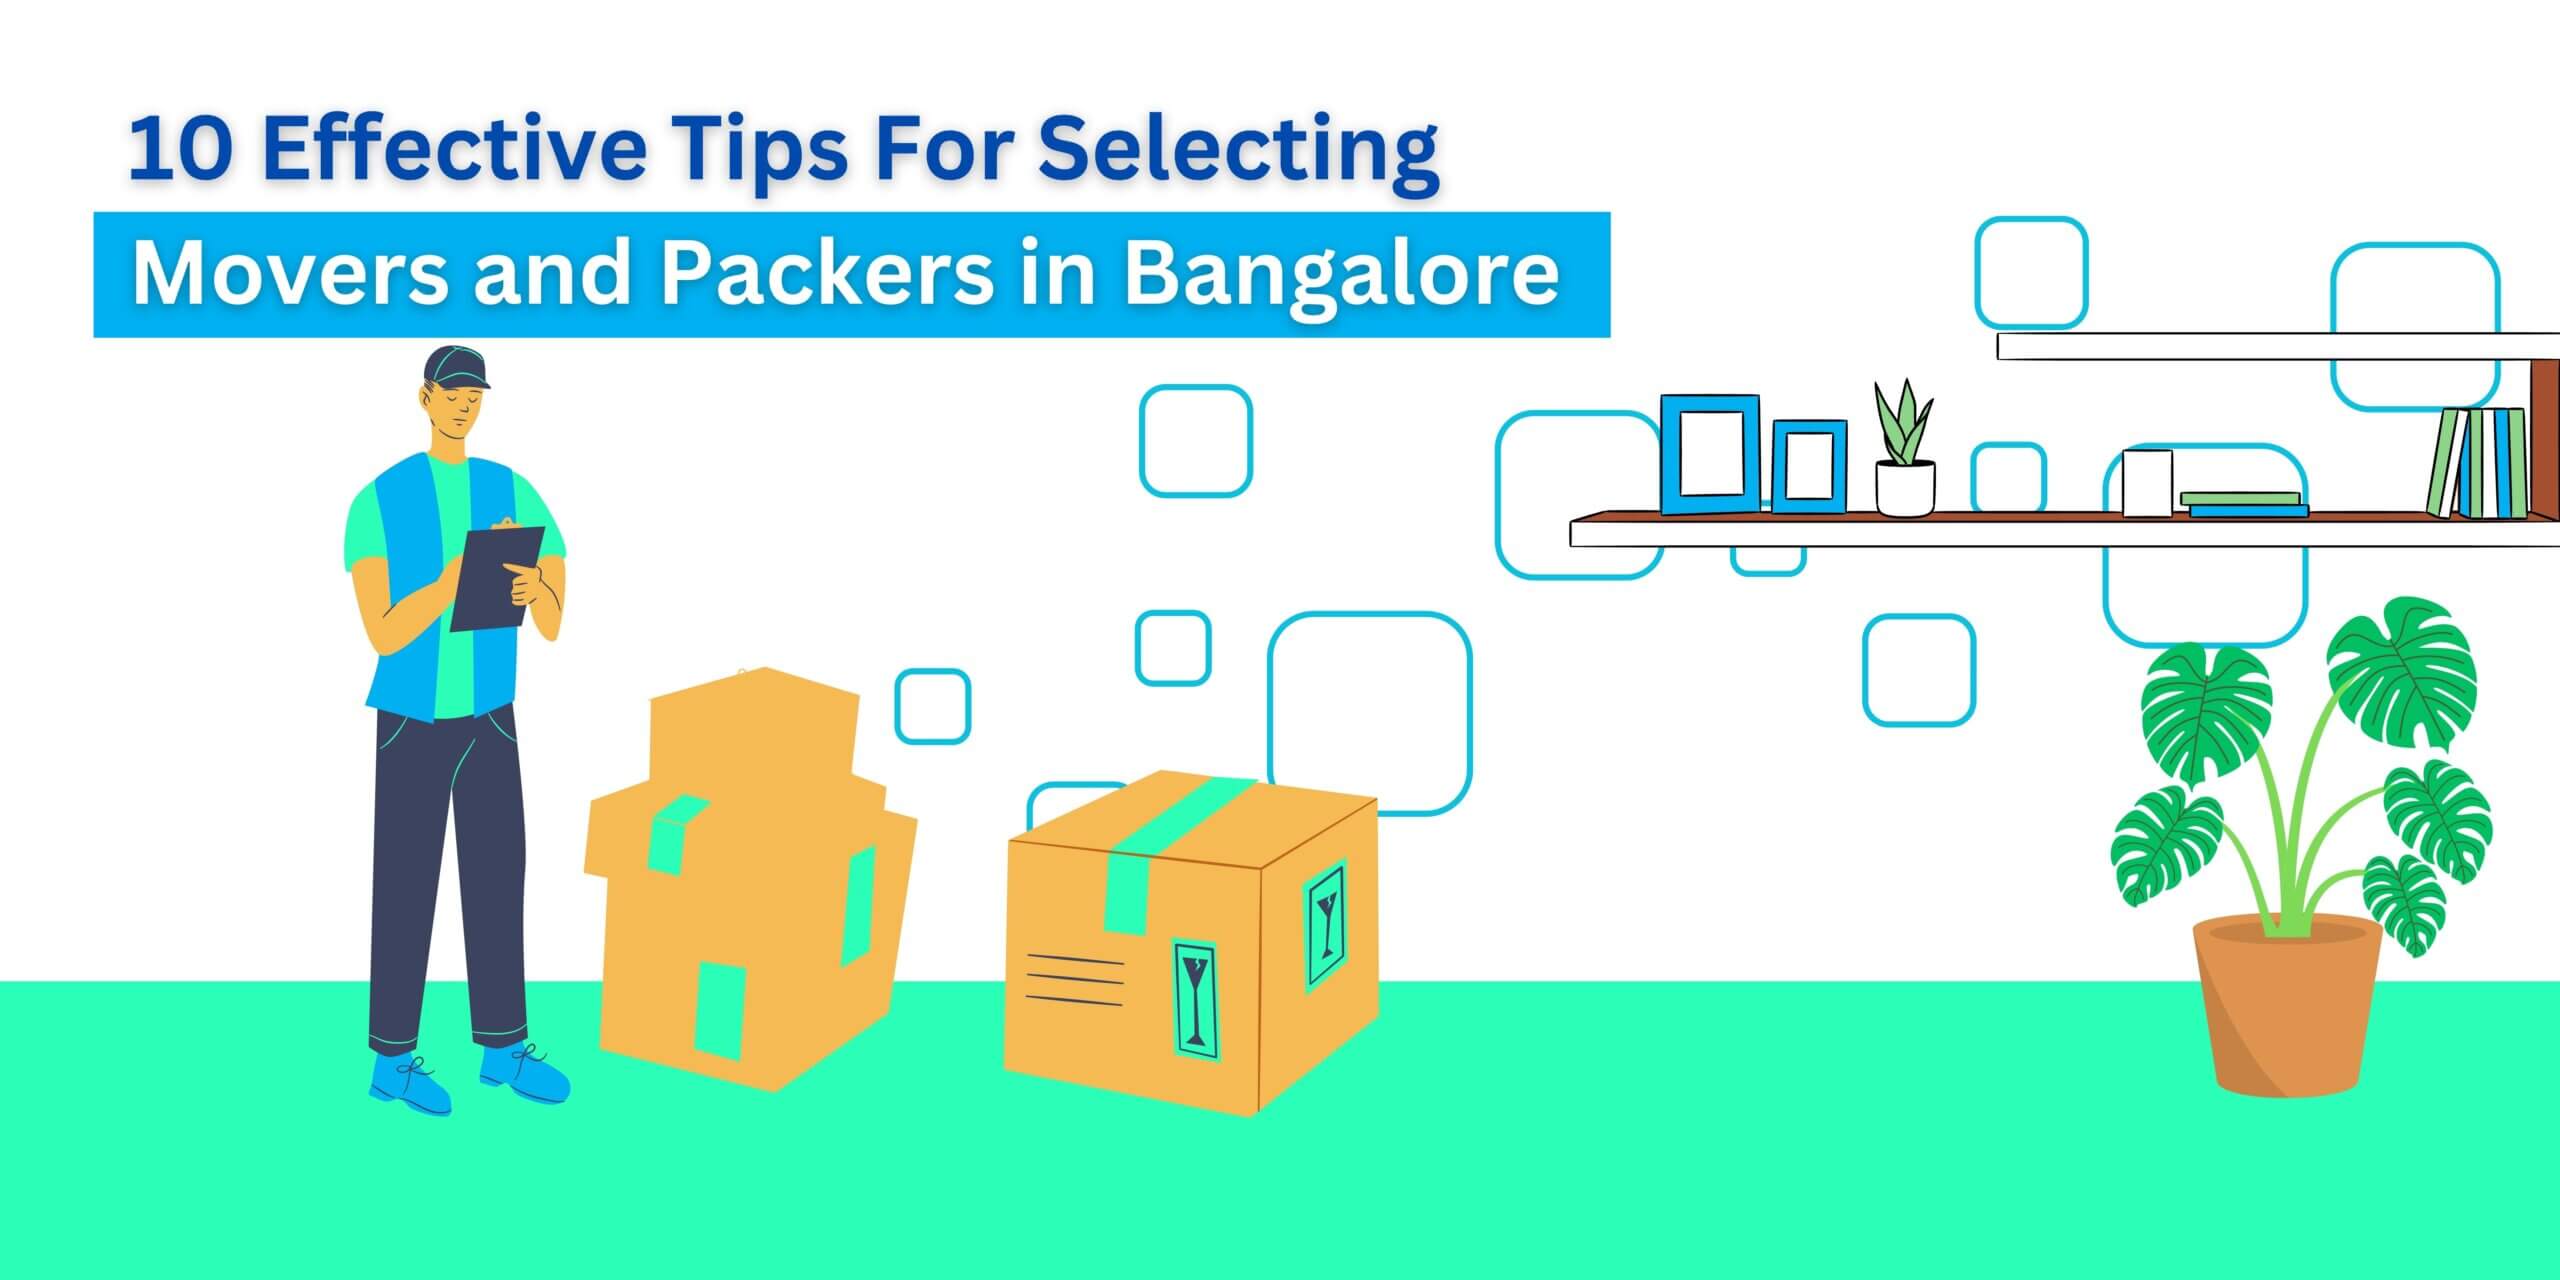 10 Effective Tips For Selecting Movers and Packers in Bangalore